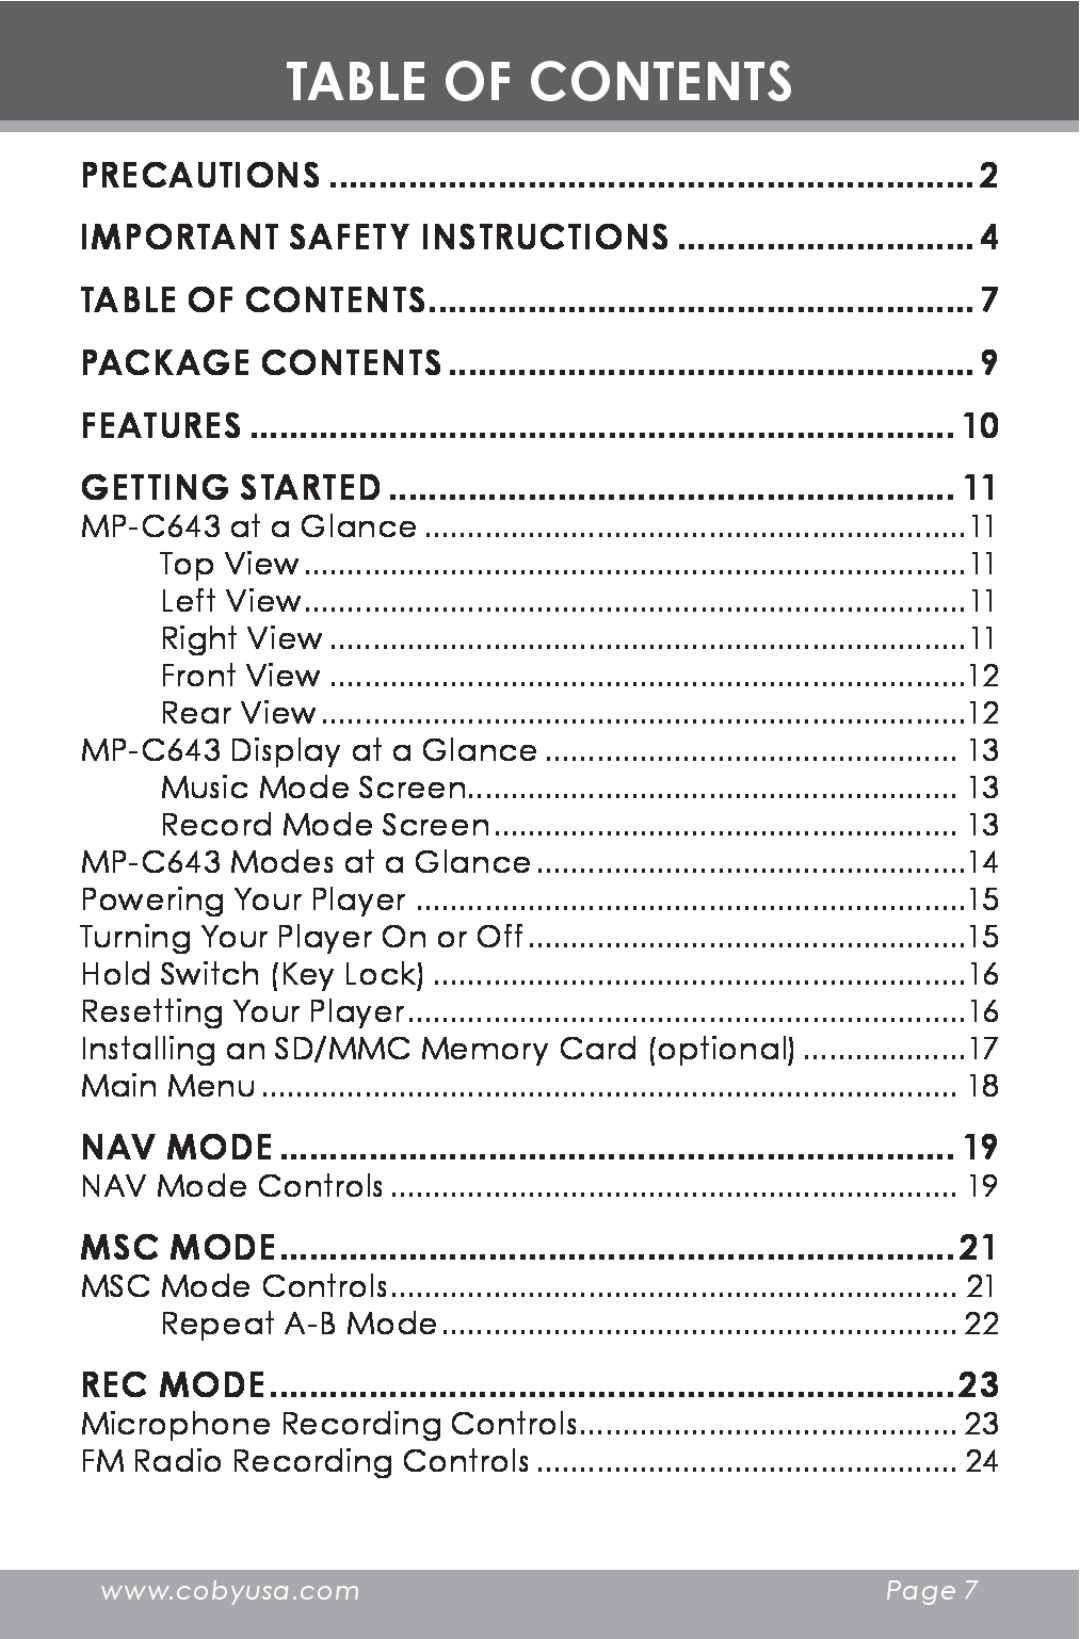 COBY electronic MP-C643 Table Of Contents, Nav Mode, Msc Mode, Rec Mode, Precautions, Important Safety Instructions 